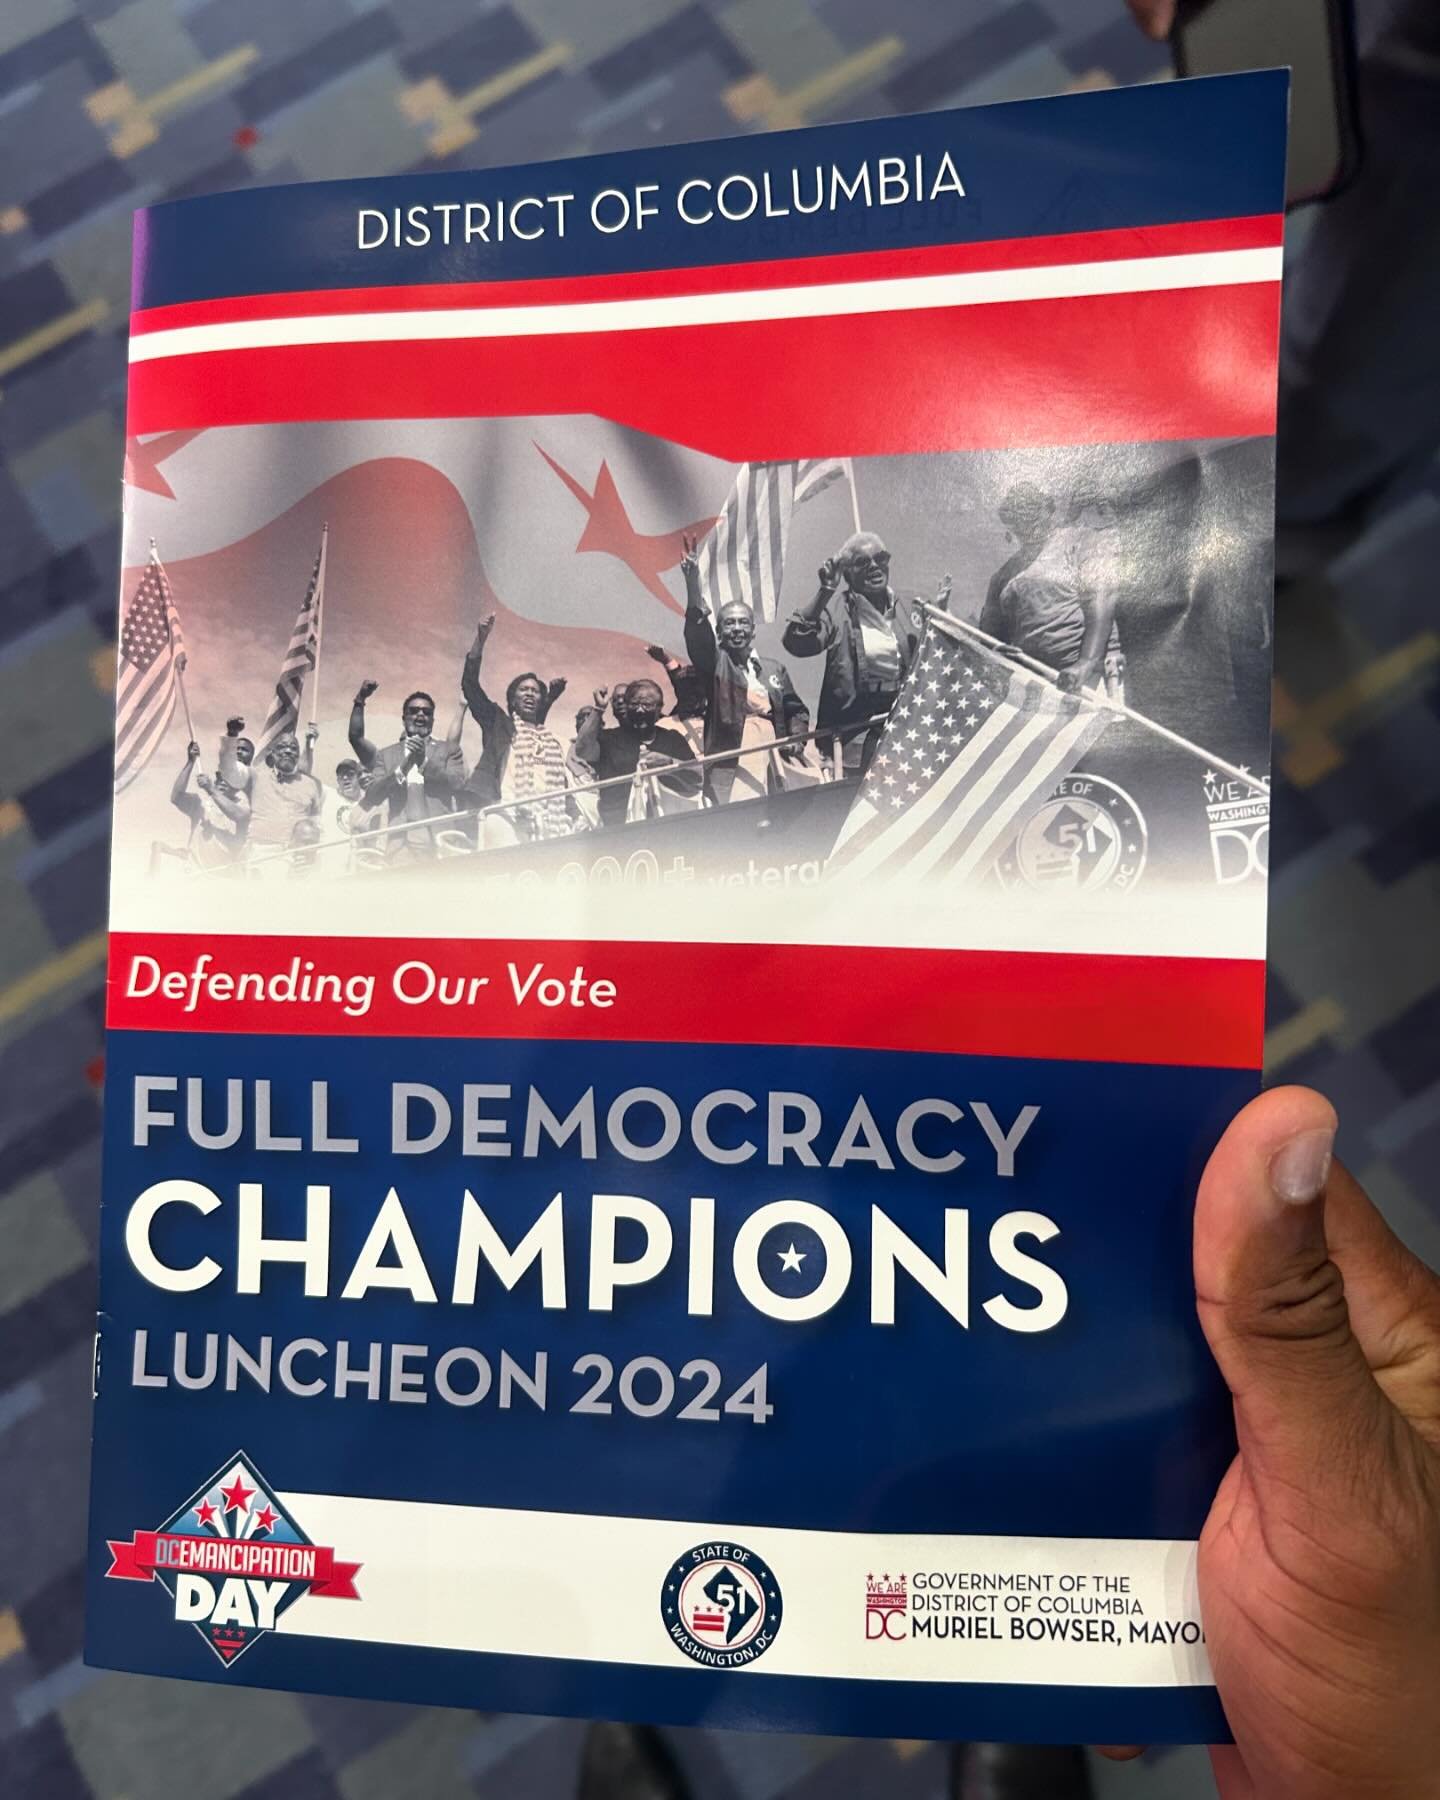 I had a fantastic time at the seventh annual Full Democracy Champions Luncheon. This year&rsquo;s theme was &ldquo;Defending Our Vote&rdquo;. 

I stand with my colleagues in the ongoing fight to achieve full voting rights and statehood for the Distri